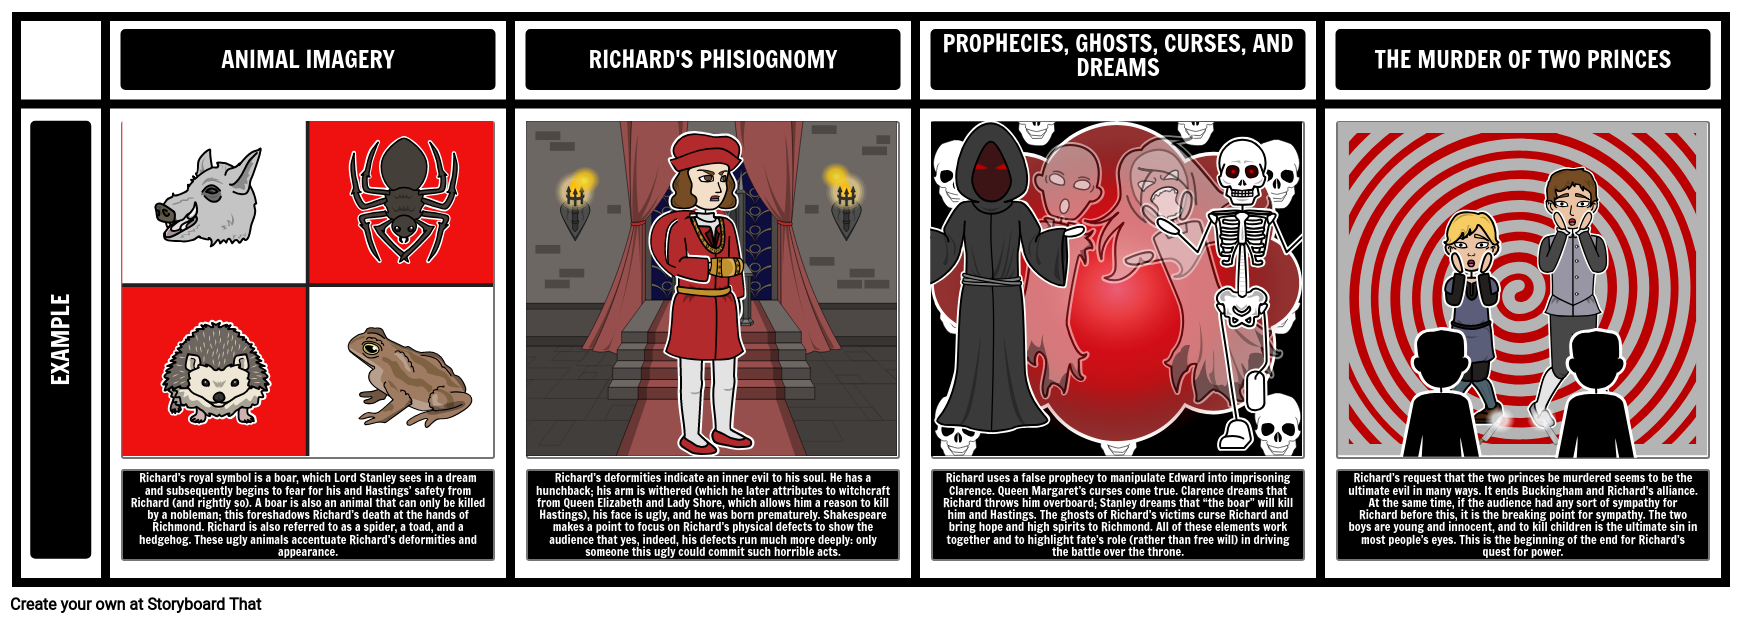 Themes, Motifs, and Symbols in The Tragedy of Richard III